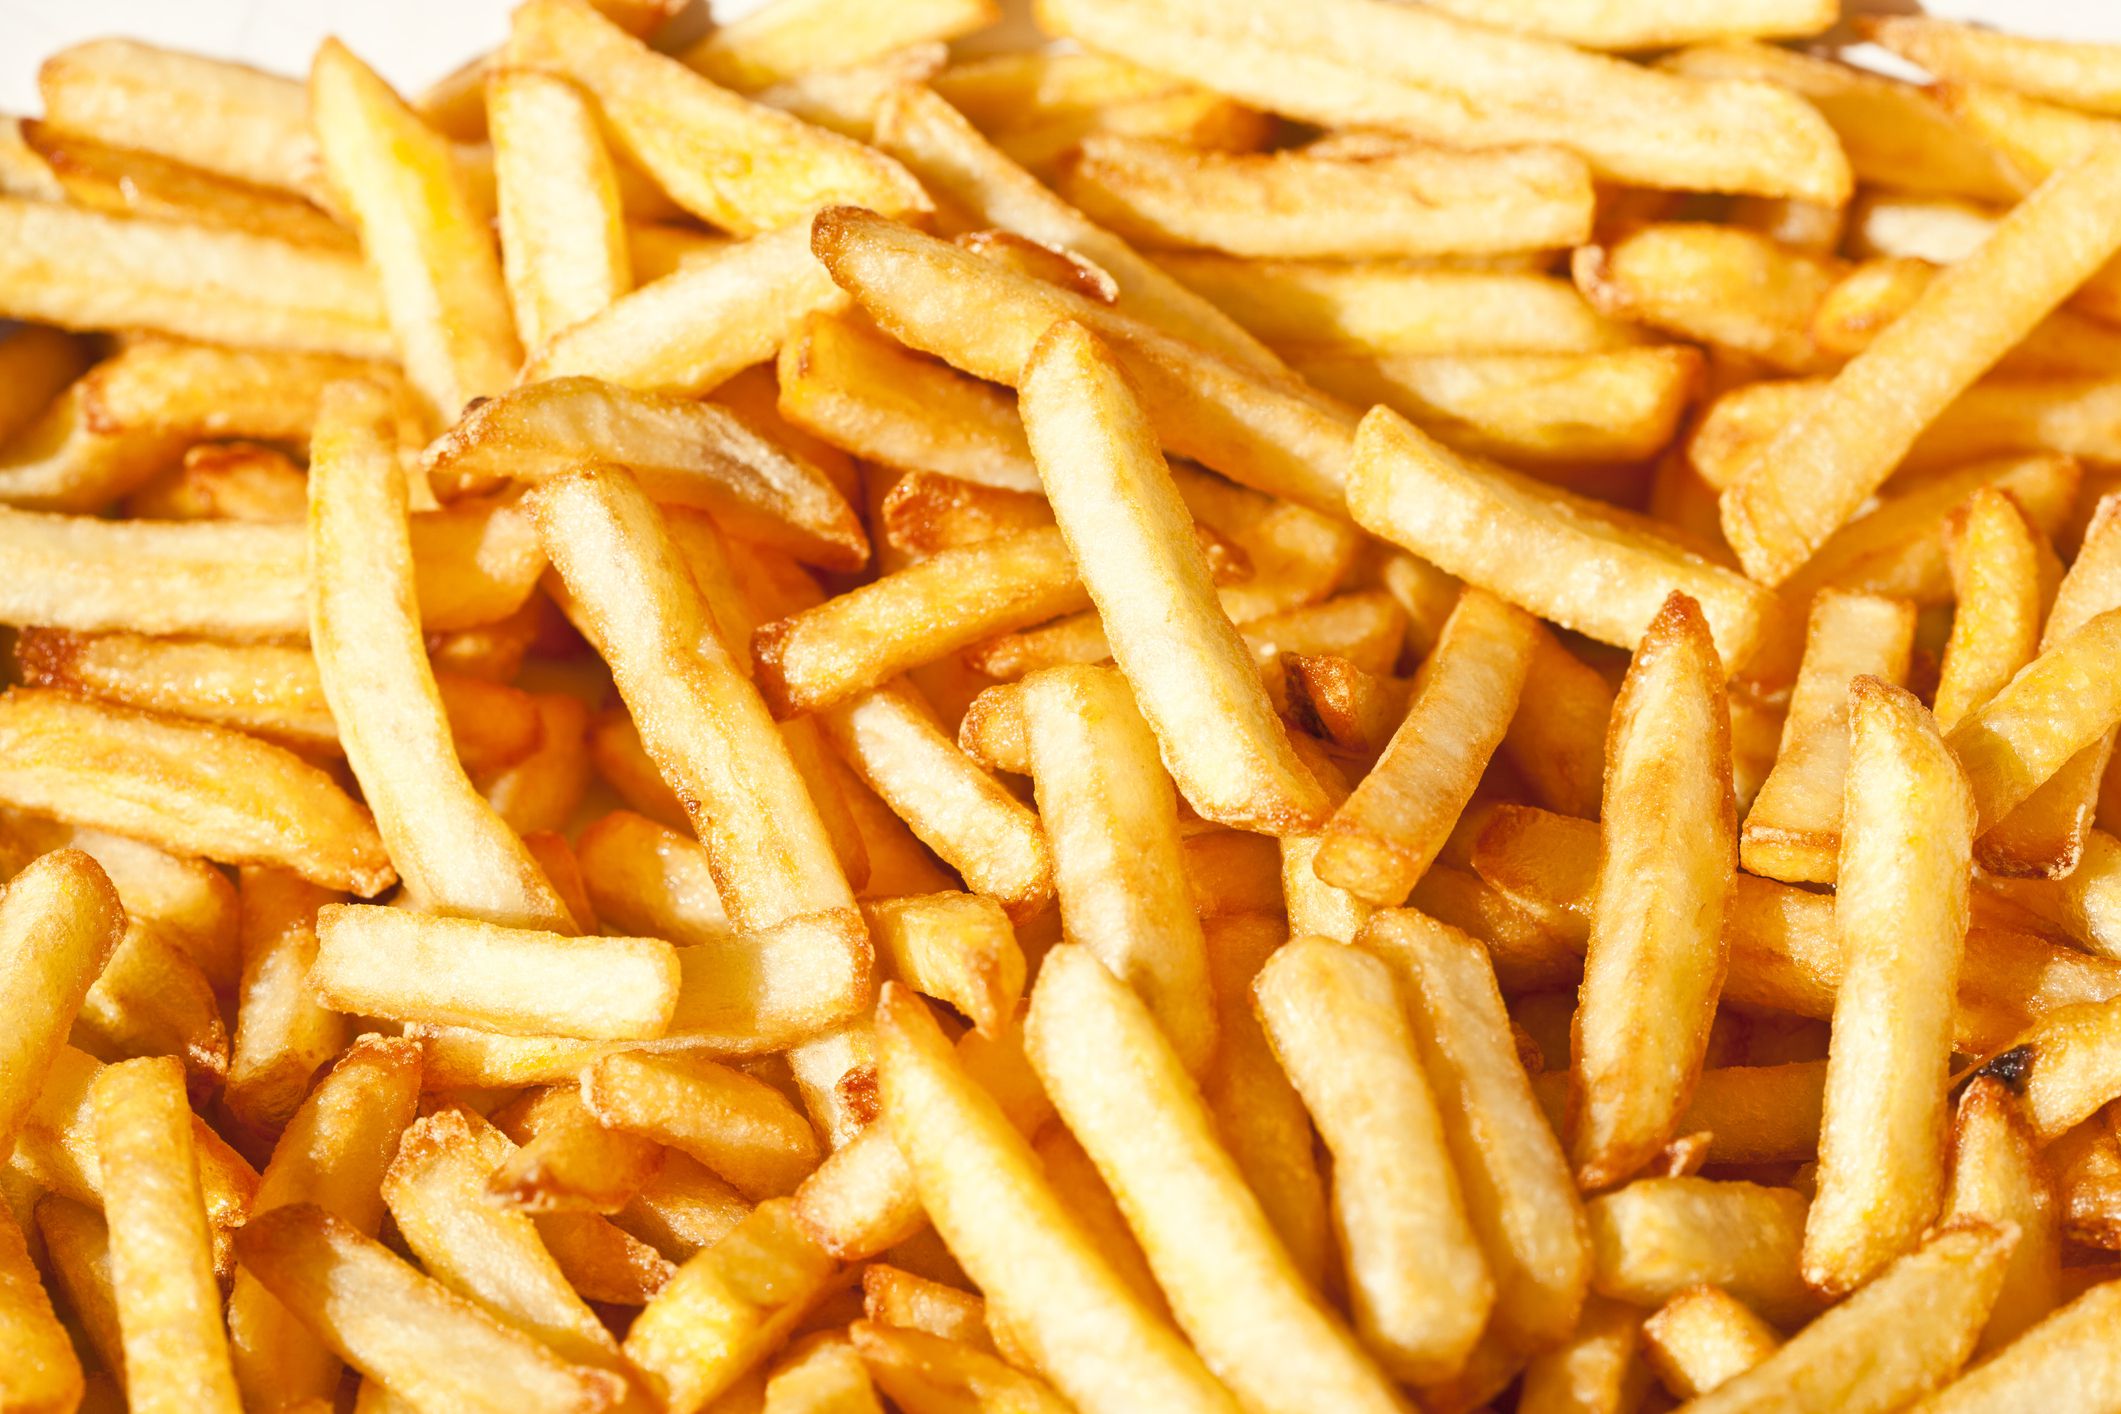 what fast food restaurant has gluten free french fries